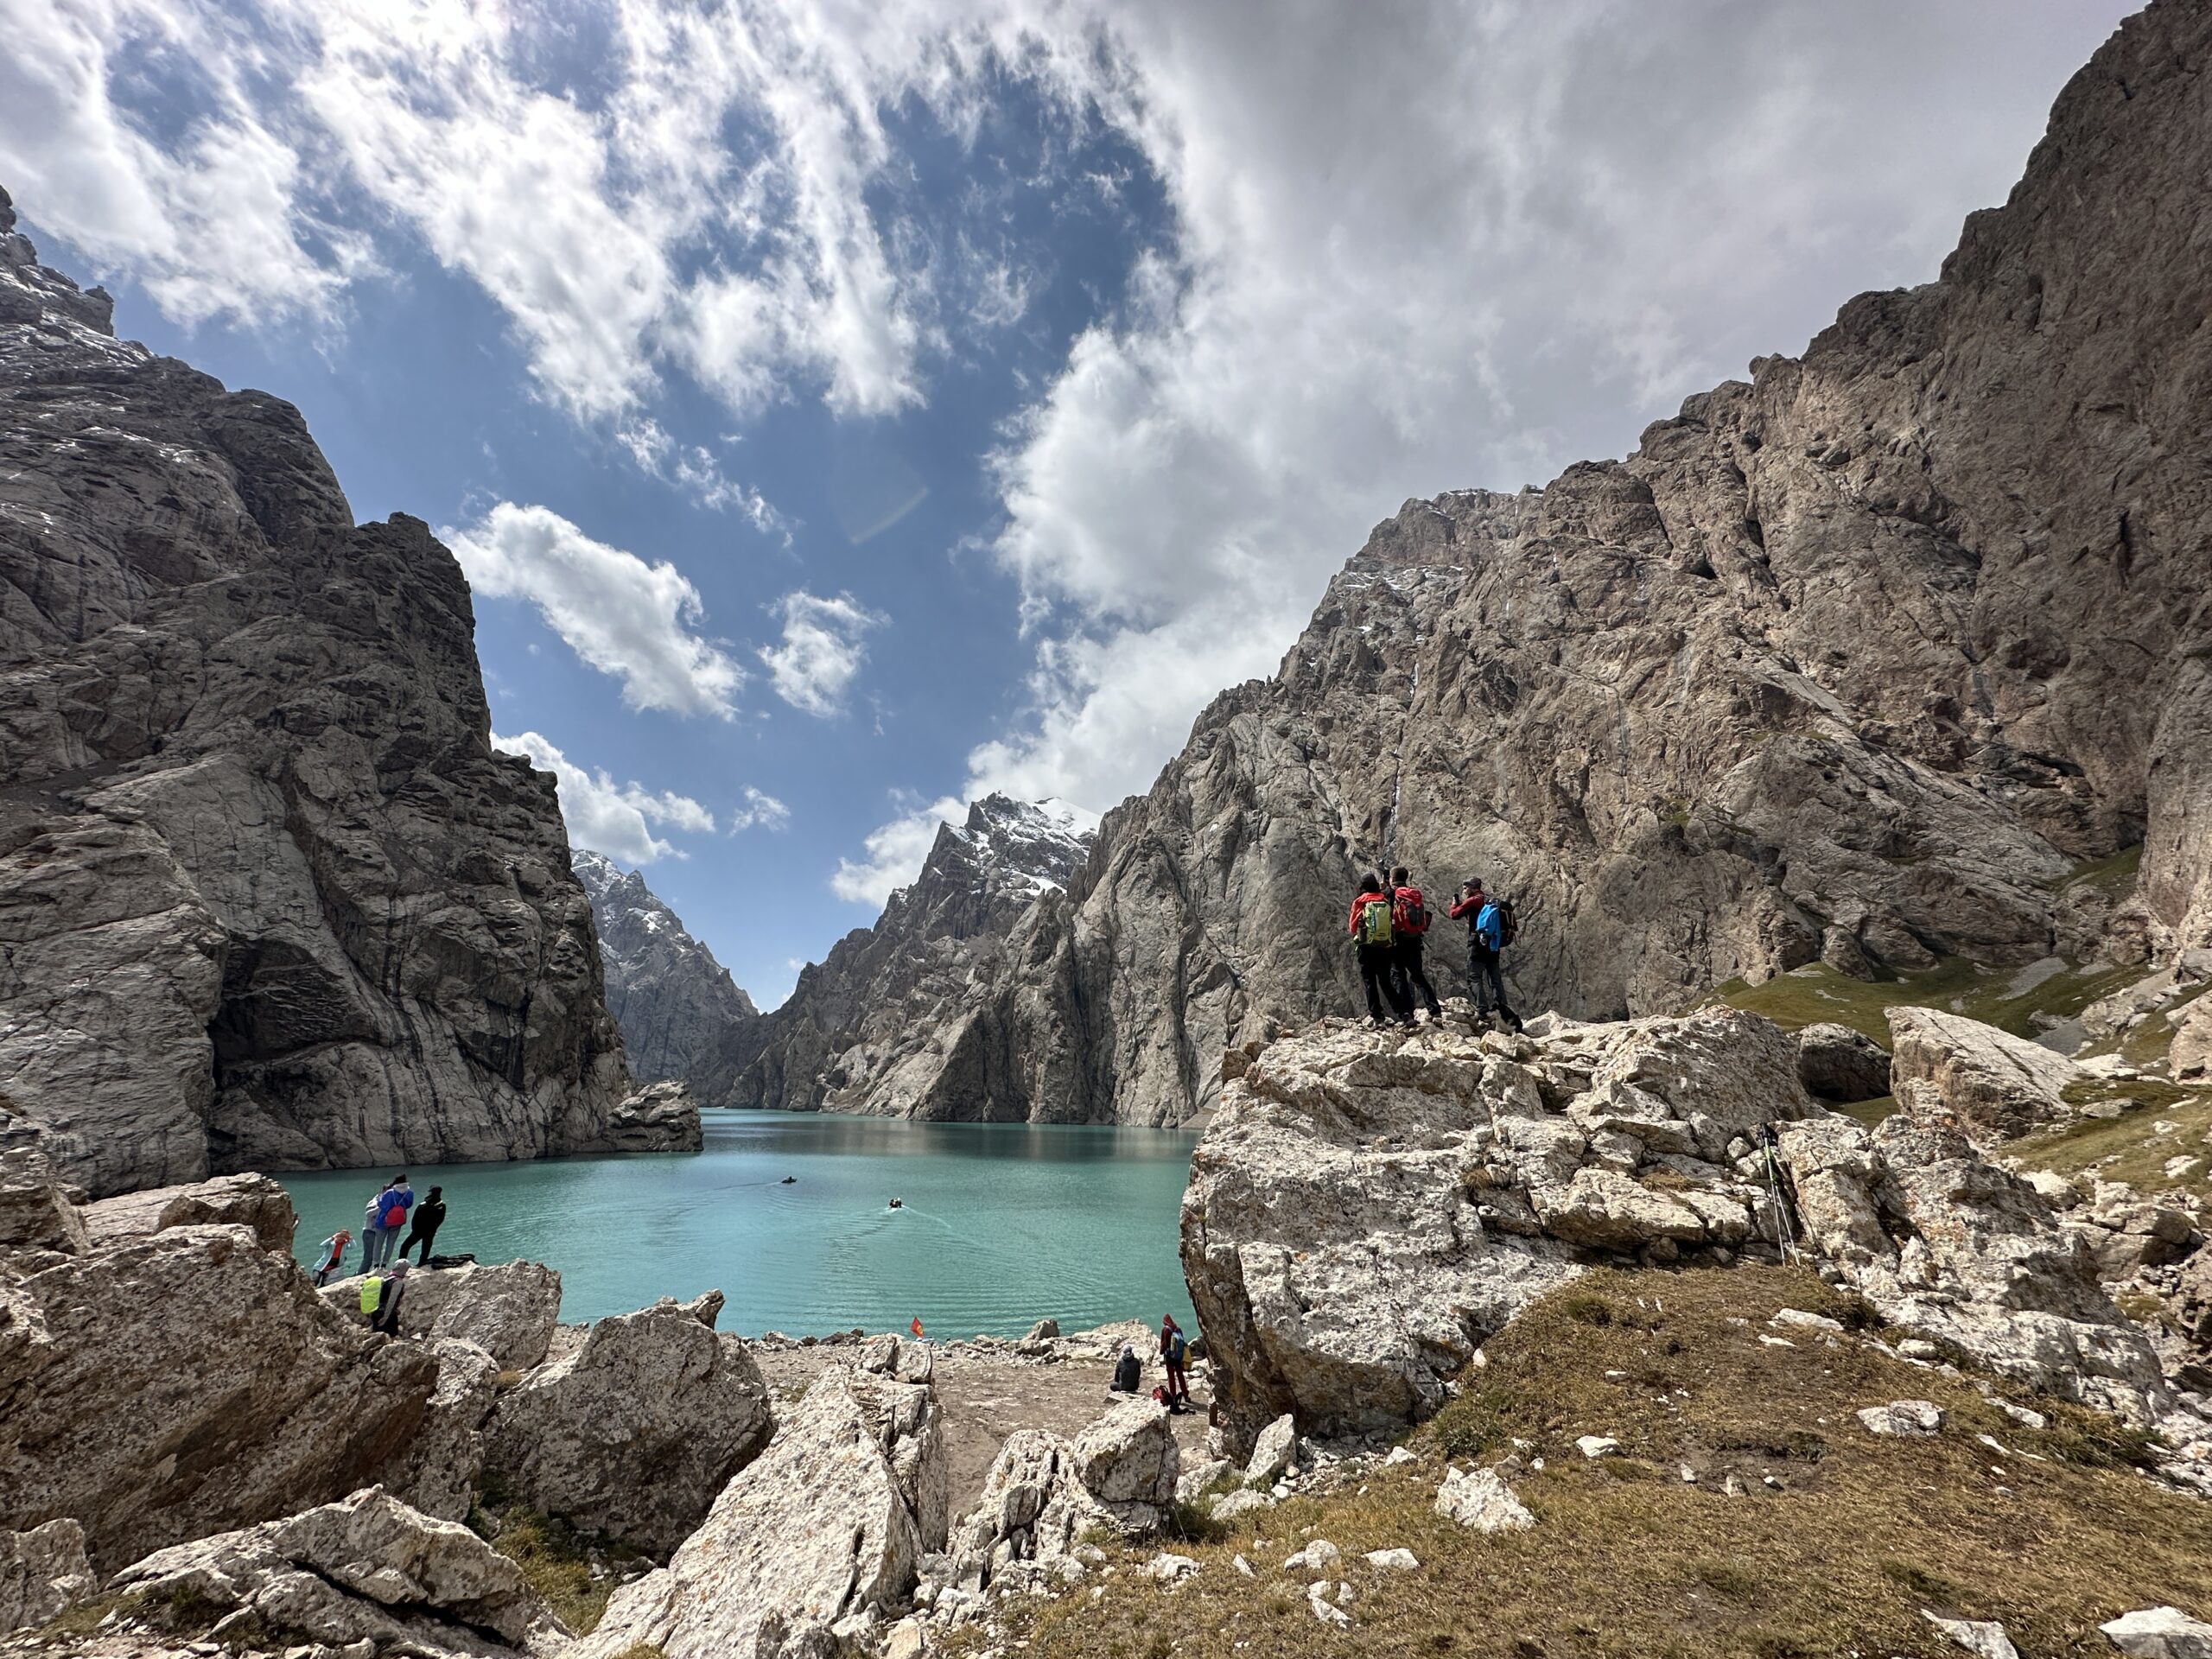 Travel guide to the wonderful Kel-Suu Lake in the Kyrgyz Republic – The Astana Times